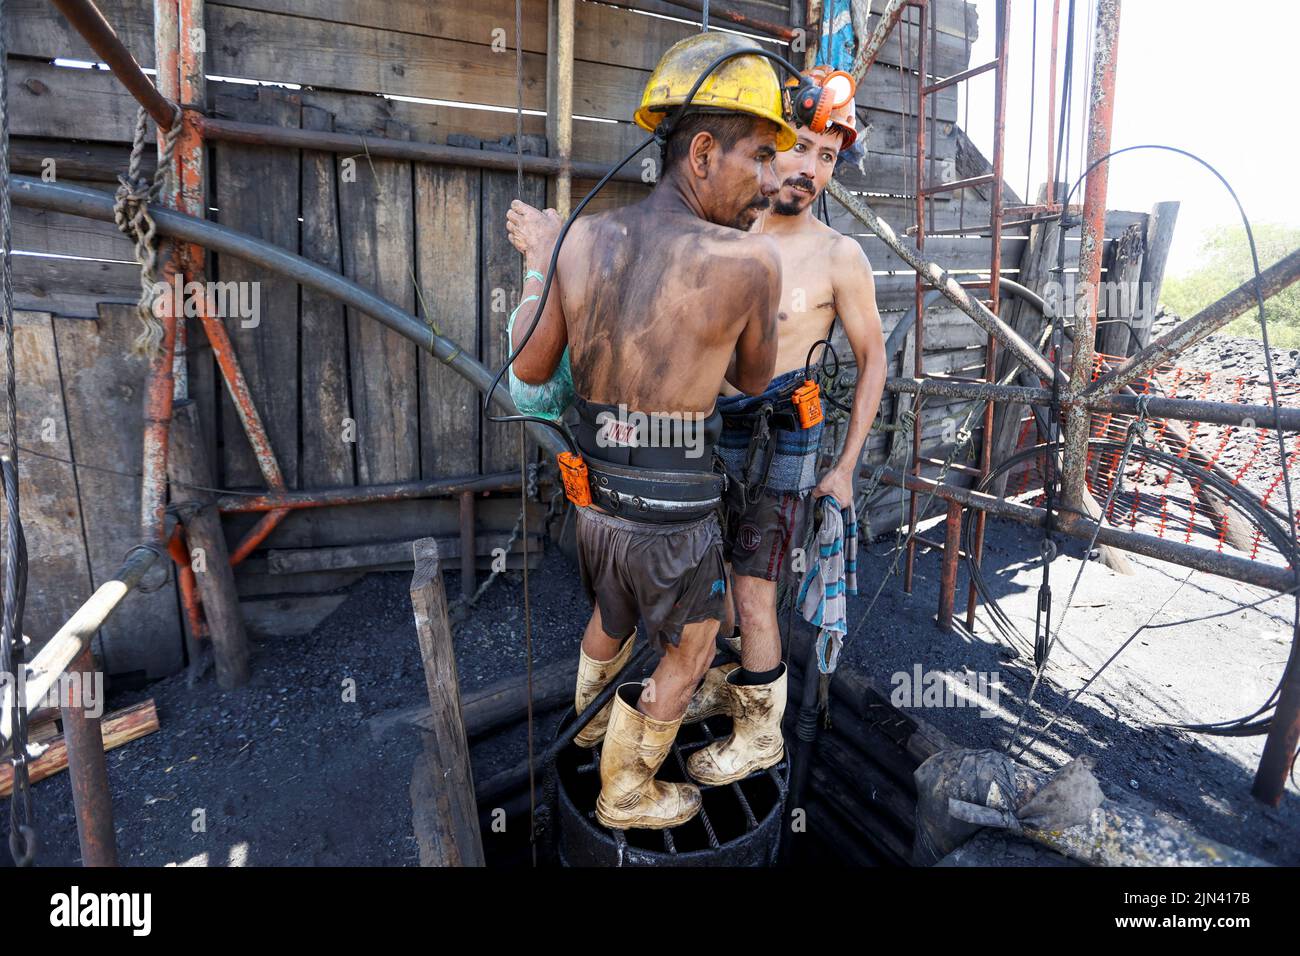 Miners descend into an artisanal coal mine, or 'pocito' (little hole), known for their rudimentary and often dangerous mining techniques, in Sabinas, Coahuila state, Mexico, August 8, 2022. REUTERS/Luis Cortes Stock Photo